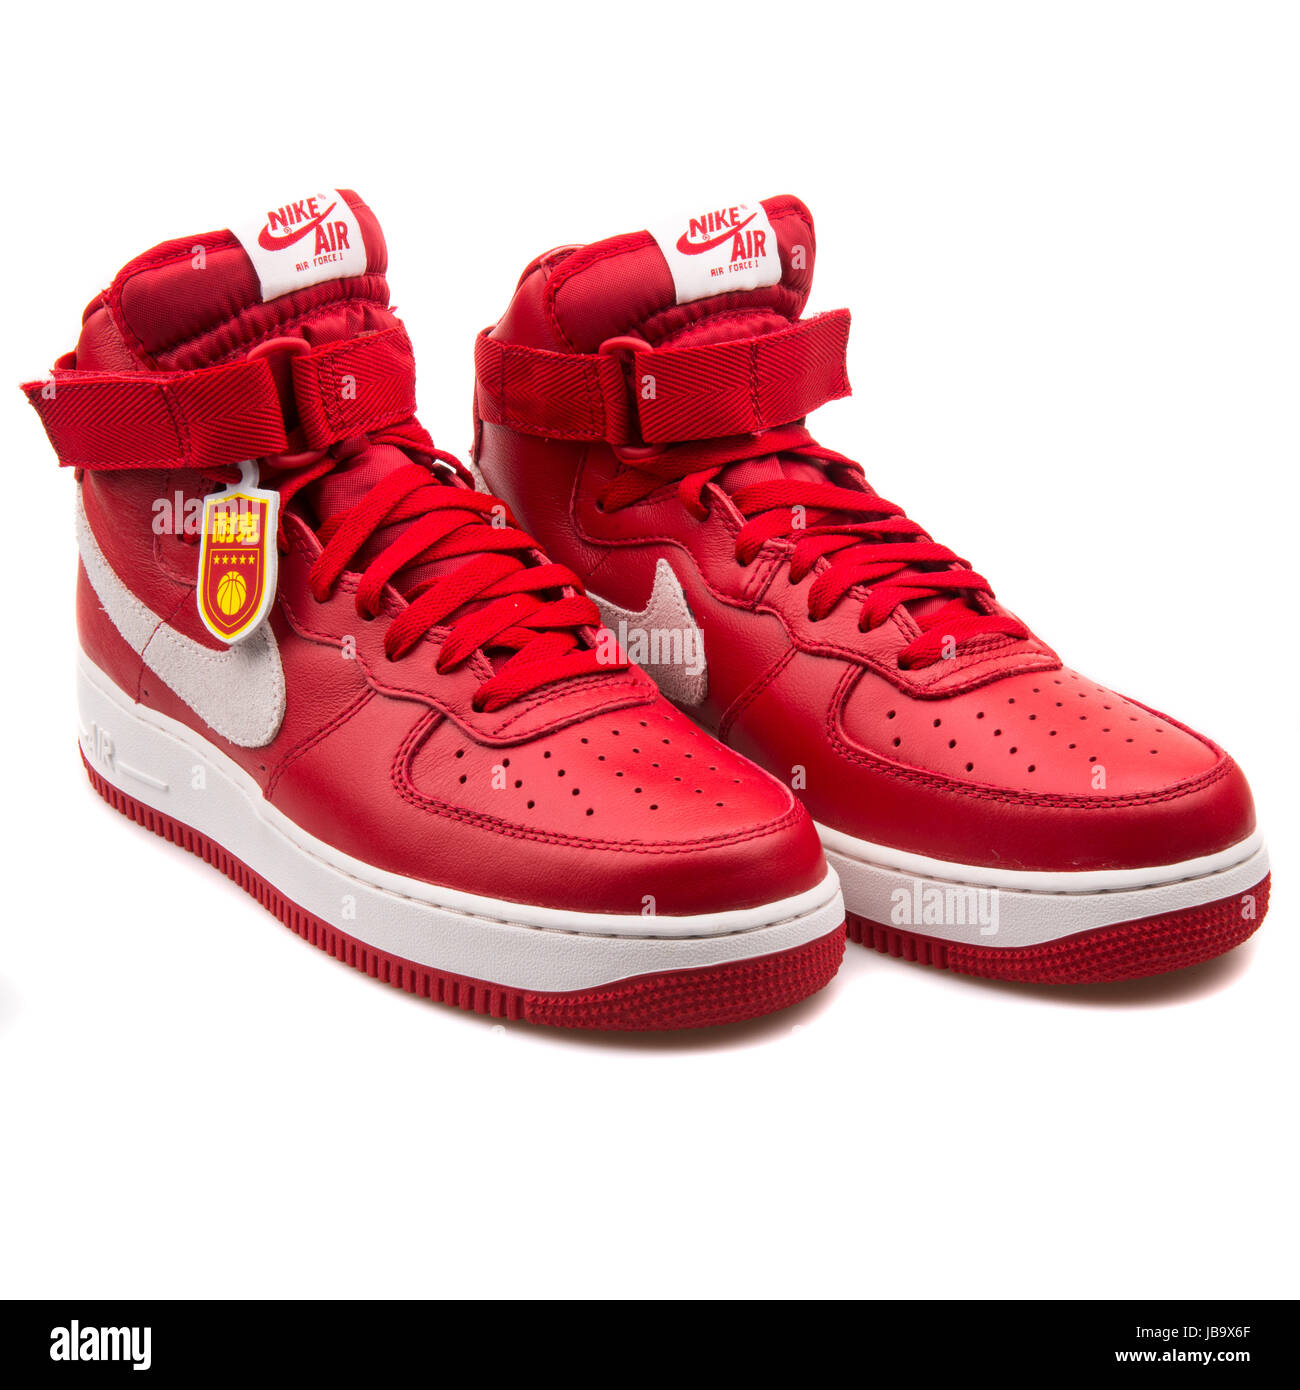 Nike Air Force 1 Hi Retro QS Gym Red and Summit White China Exclusive Men's  Retro Basketball Shoes - 743546-600 Stock Photo - Alamy